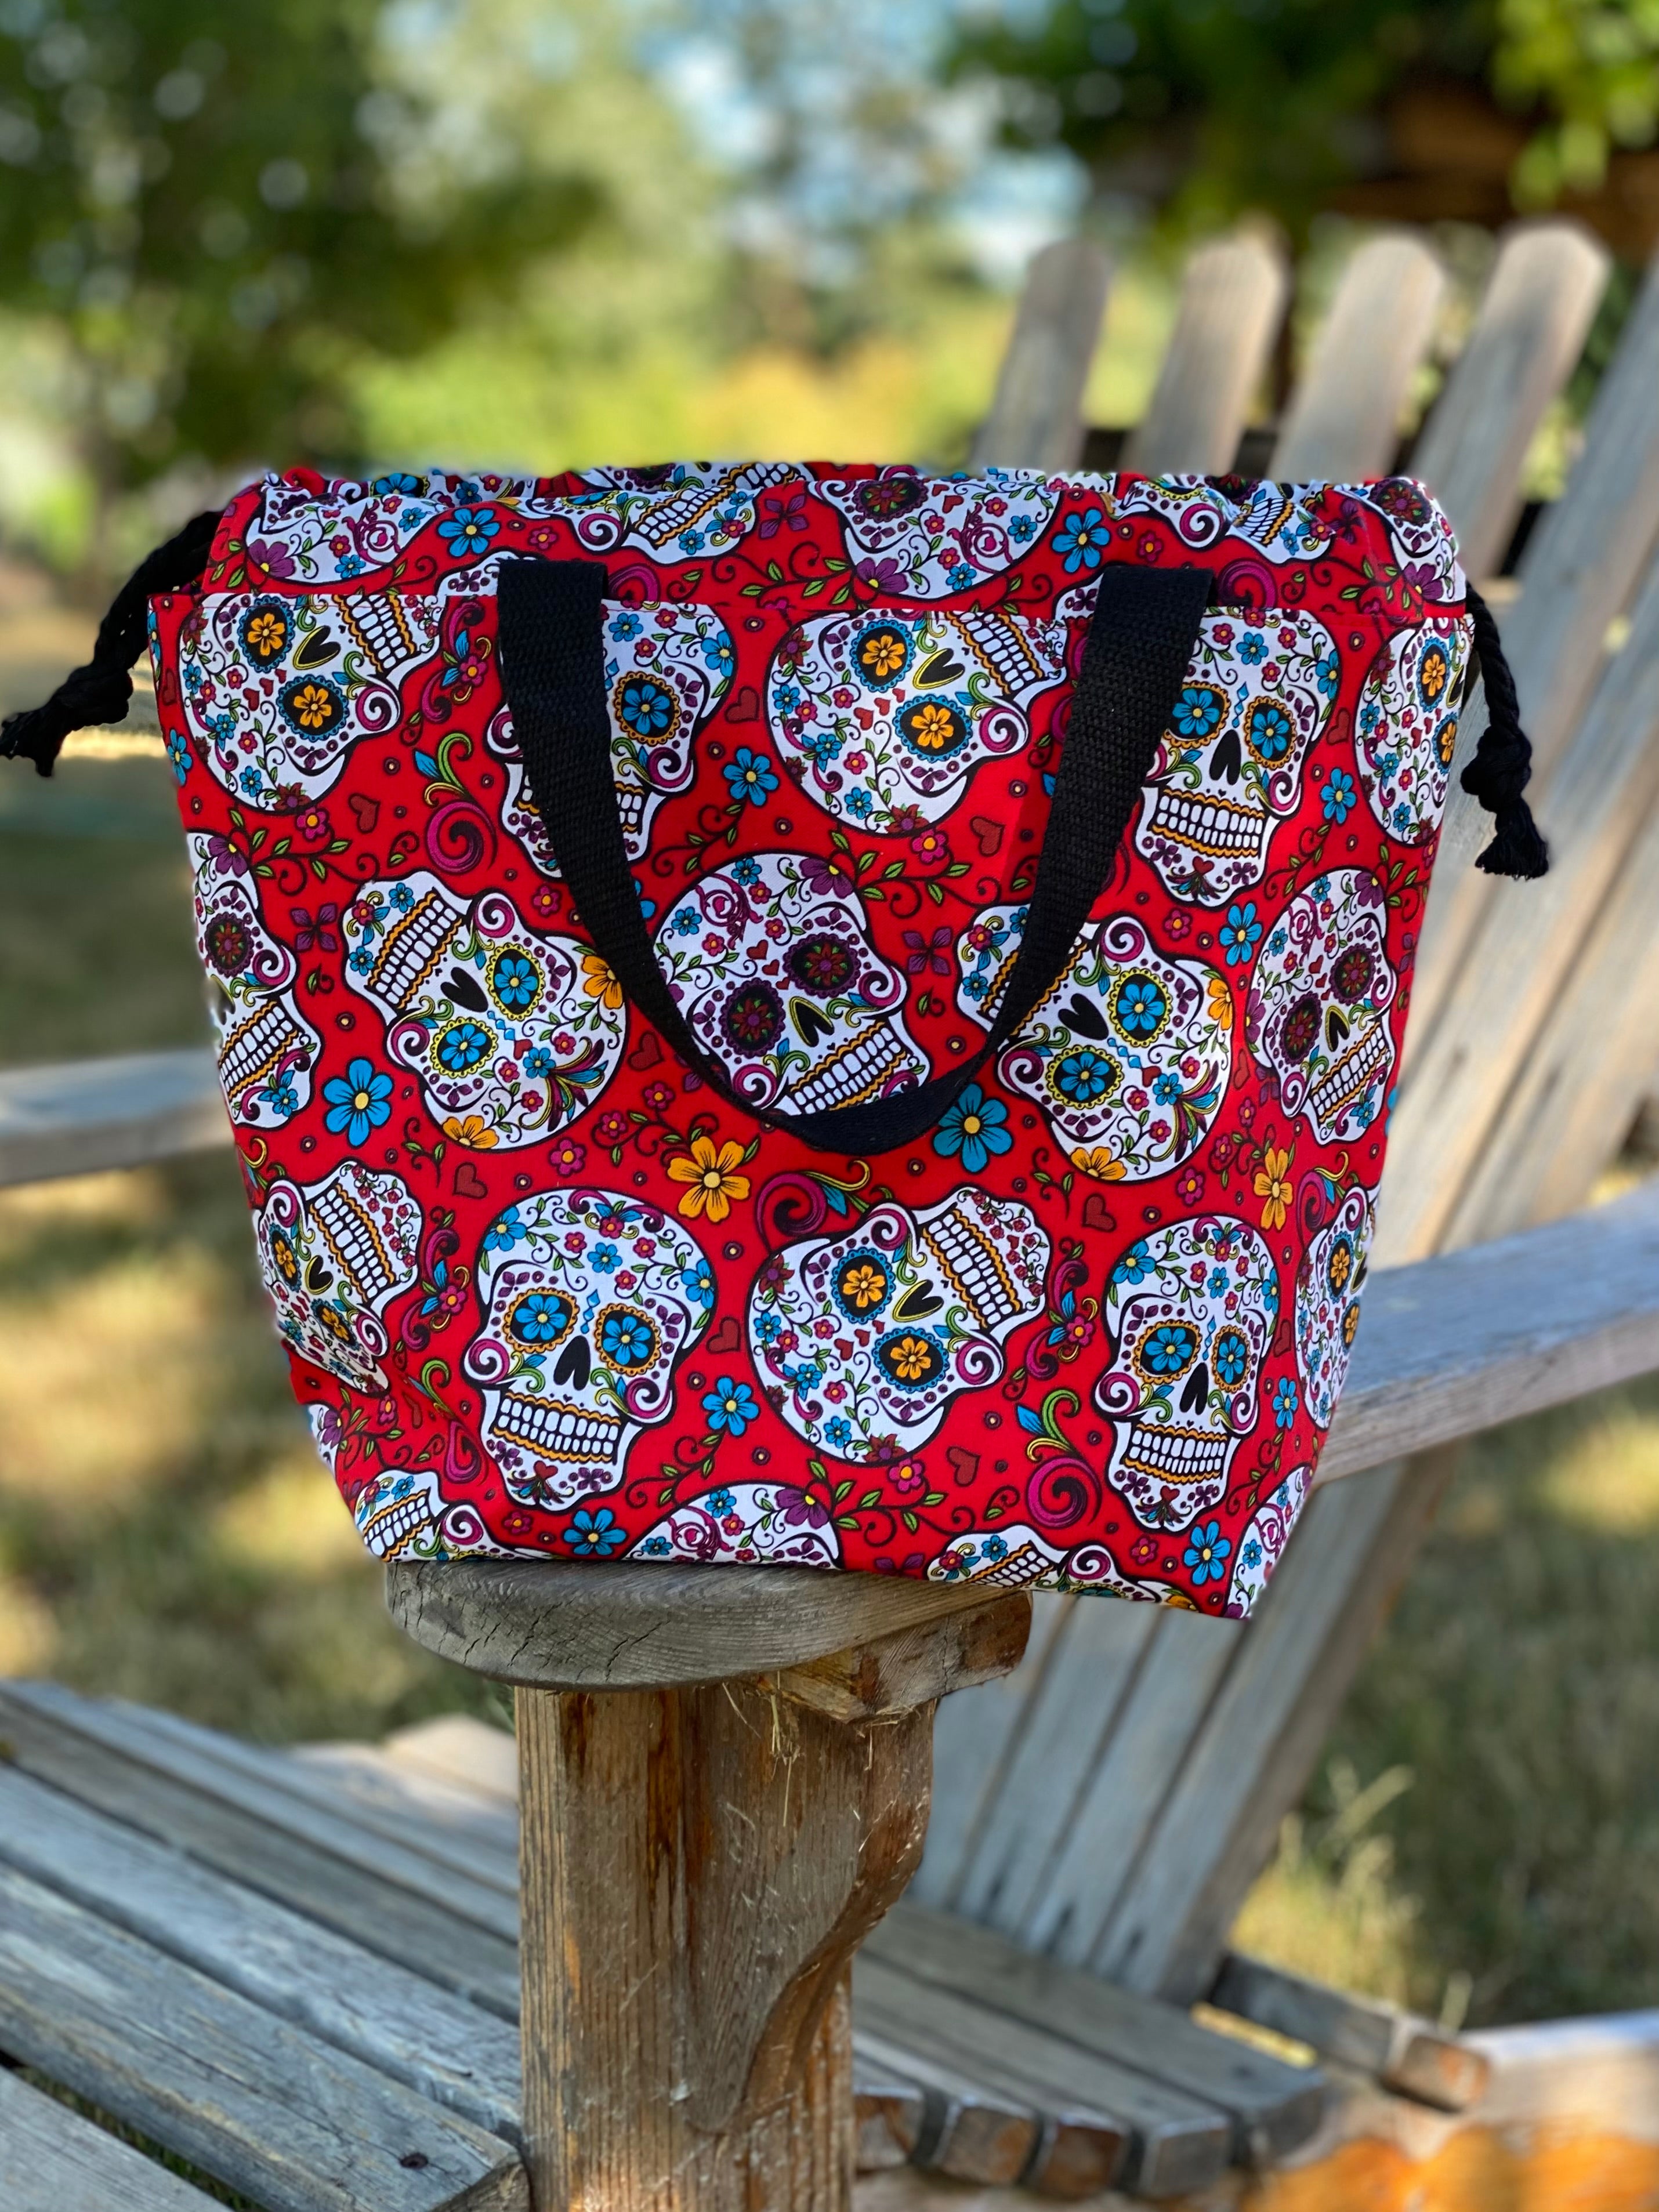 Day of the Dead Cotton Project Bag, Project Bag for Knitters, Mexican Sugar Skulls Cotton Bag